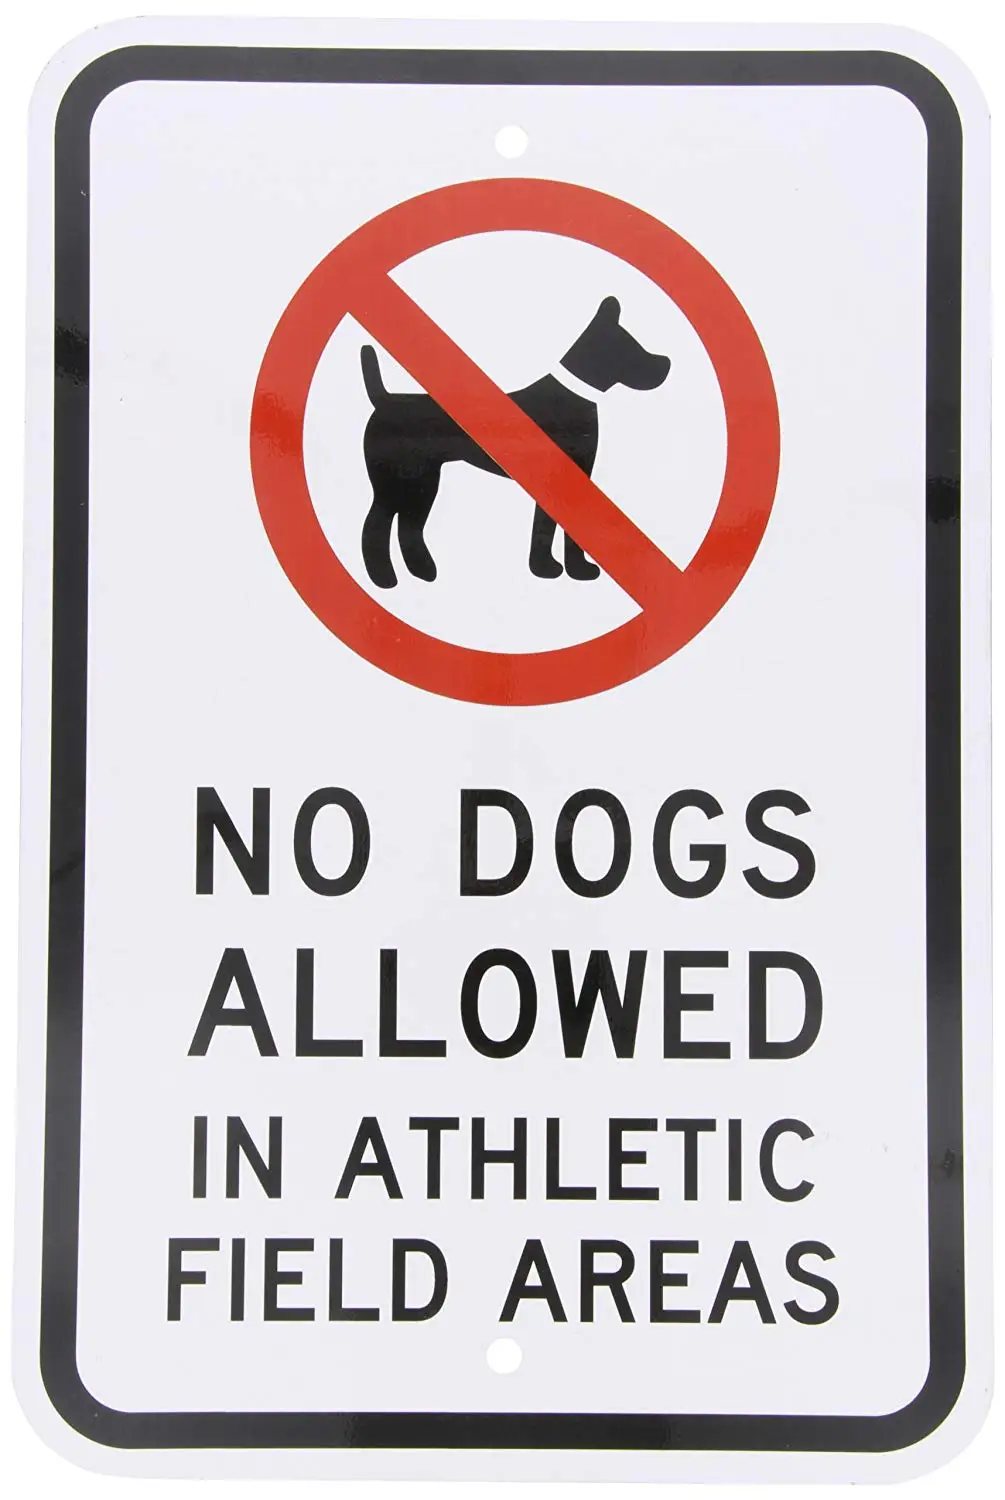 Dogs allowed. Dogs are not allowed. Pets allowed. Not allowed Dog. Dogs are allowed.